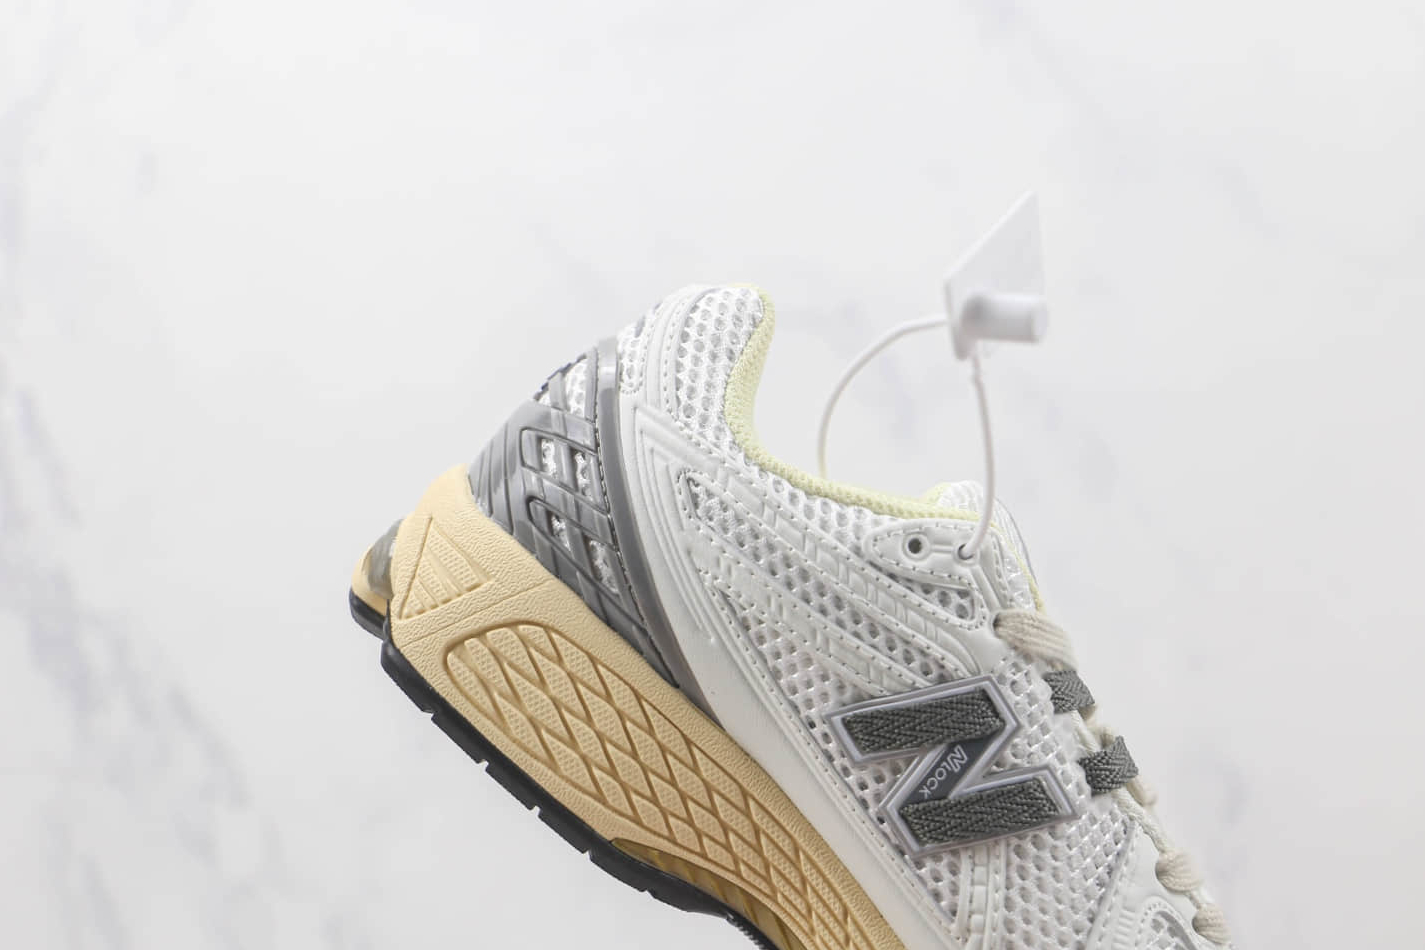 New Balance 1906R 'Sea Salt Marblehead' M1906RP Shoes: Premium Style and Comfort for All